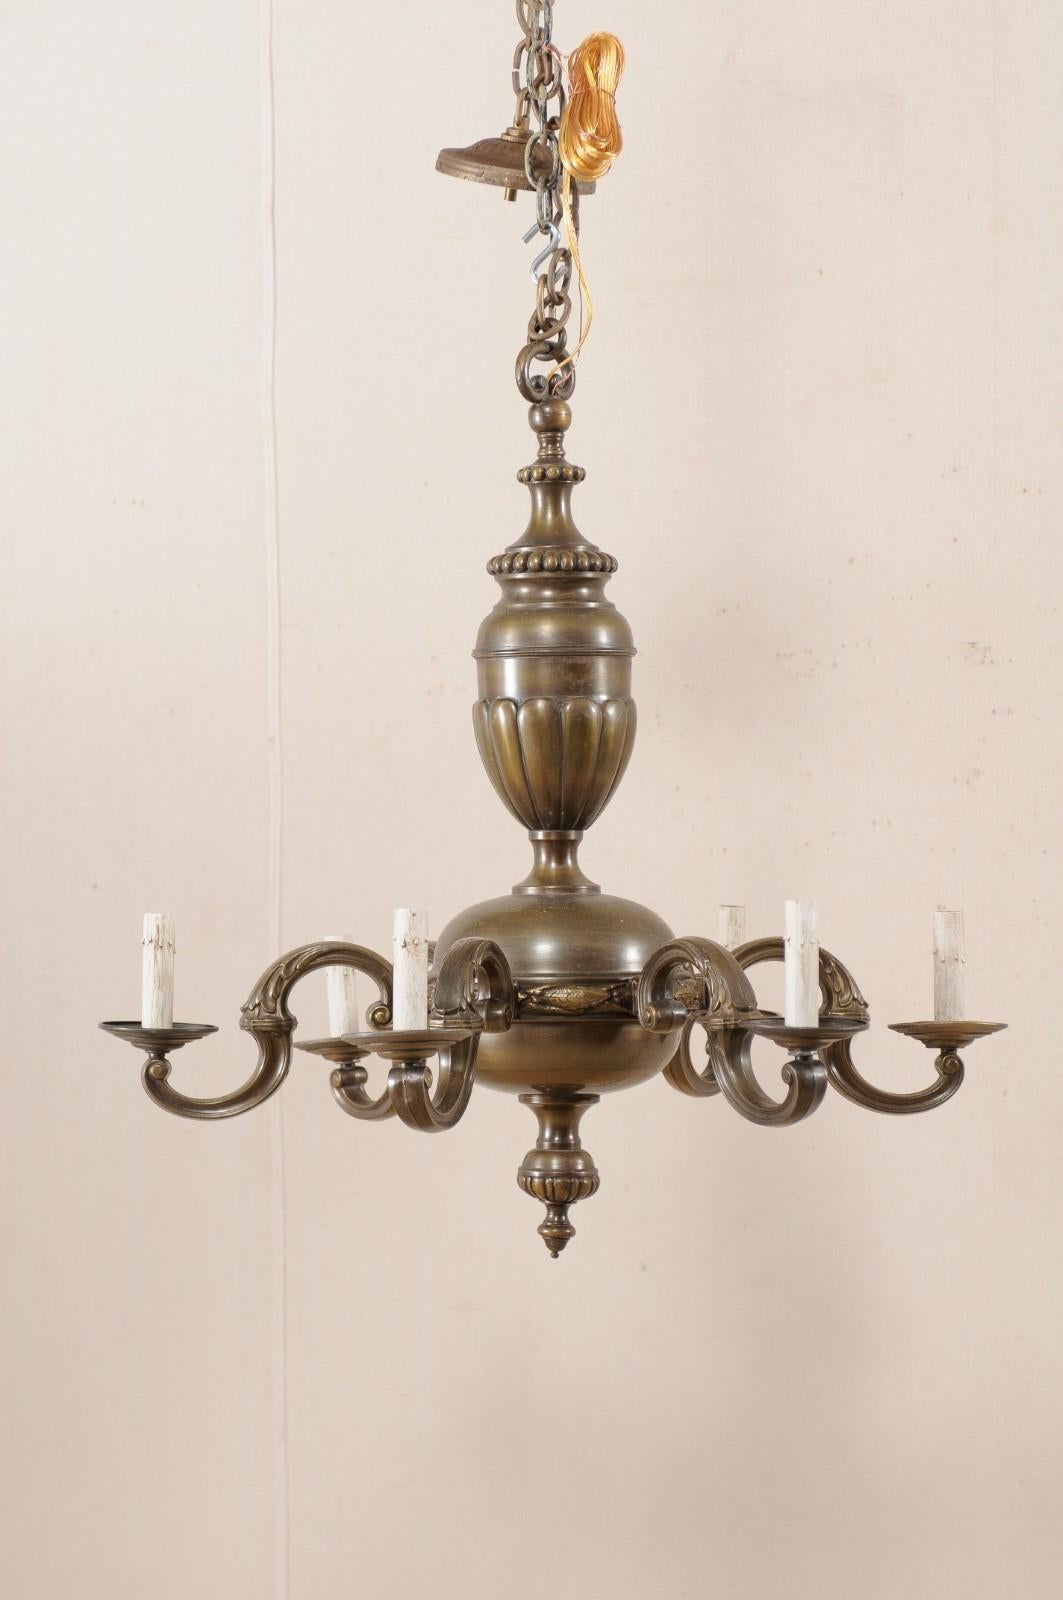 A French bronze chandelier with six lights from the mid-20th century. This vintage chandelier from France features a dark, nicely patinated bronze body. The central gallery is made up of two rounded sections, the upper more oblong, with fan and dot